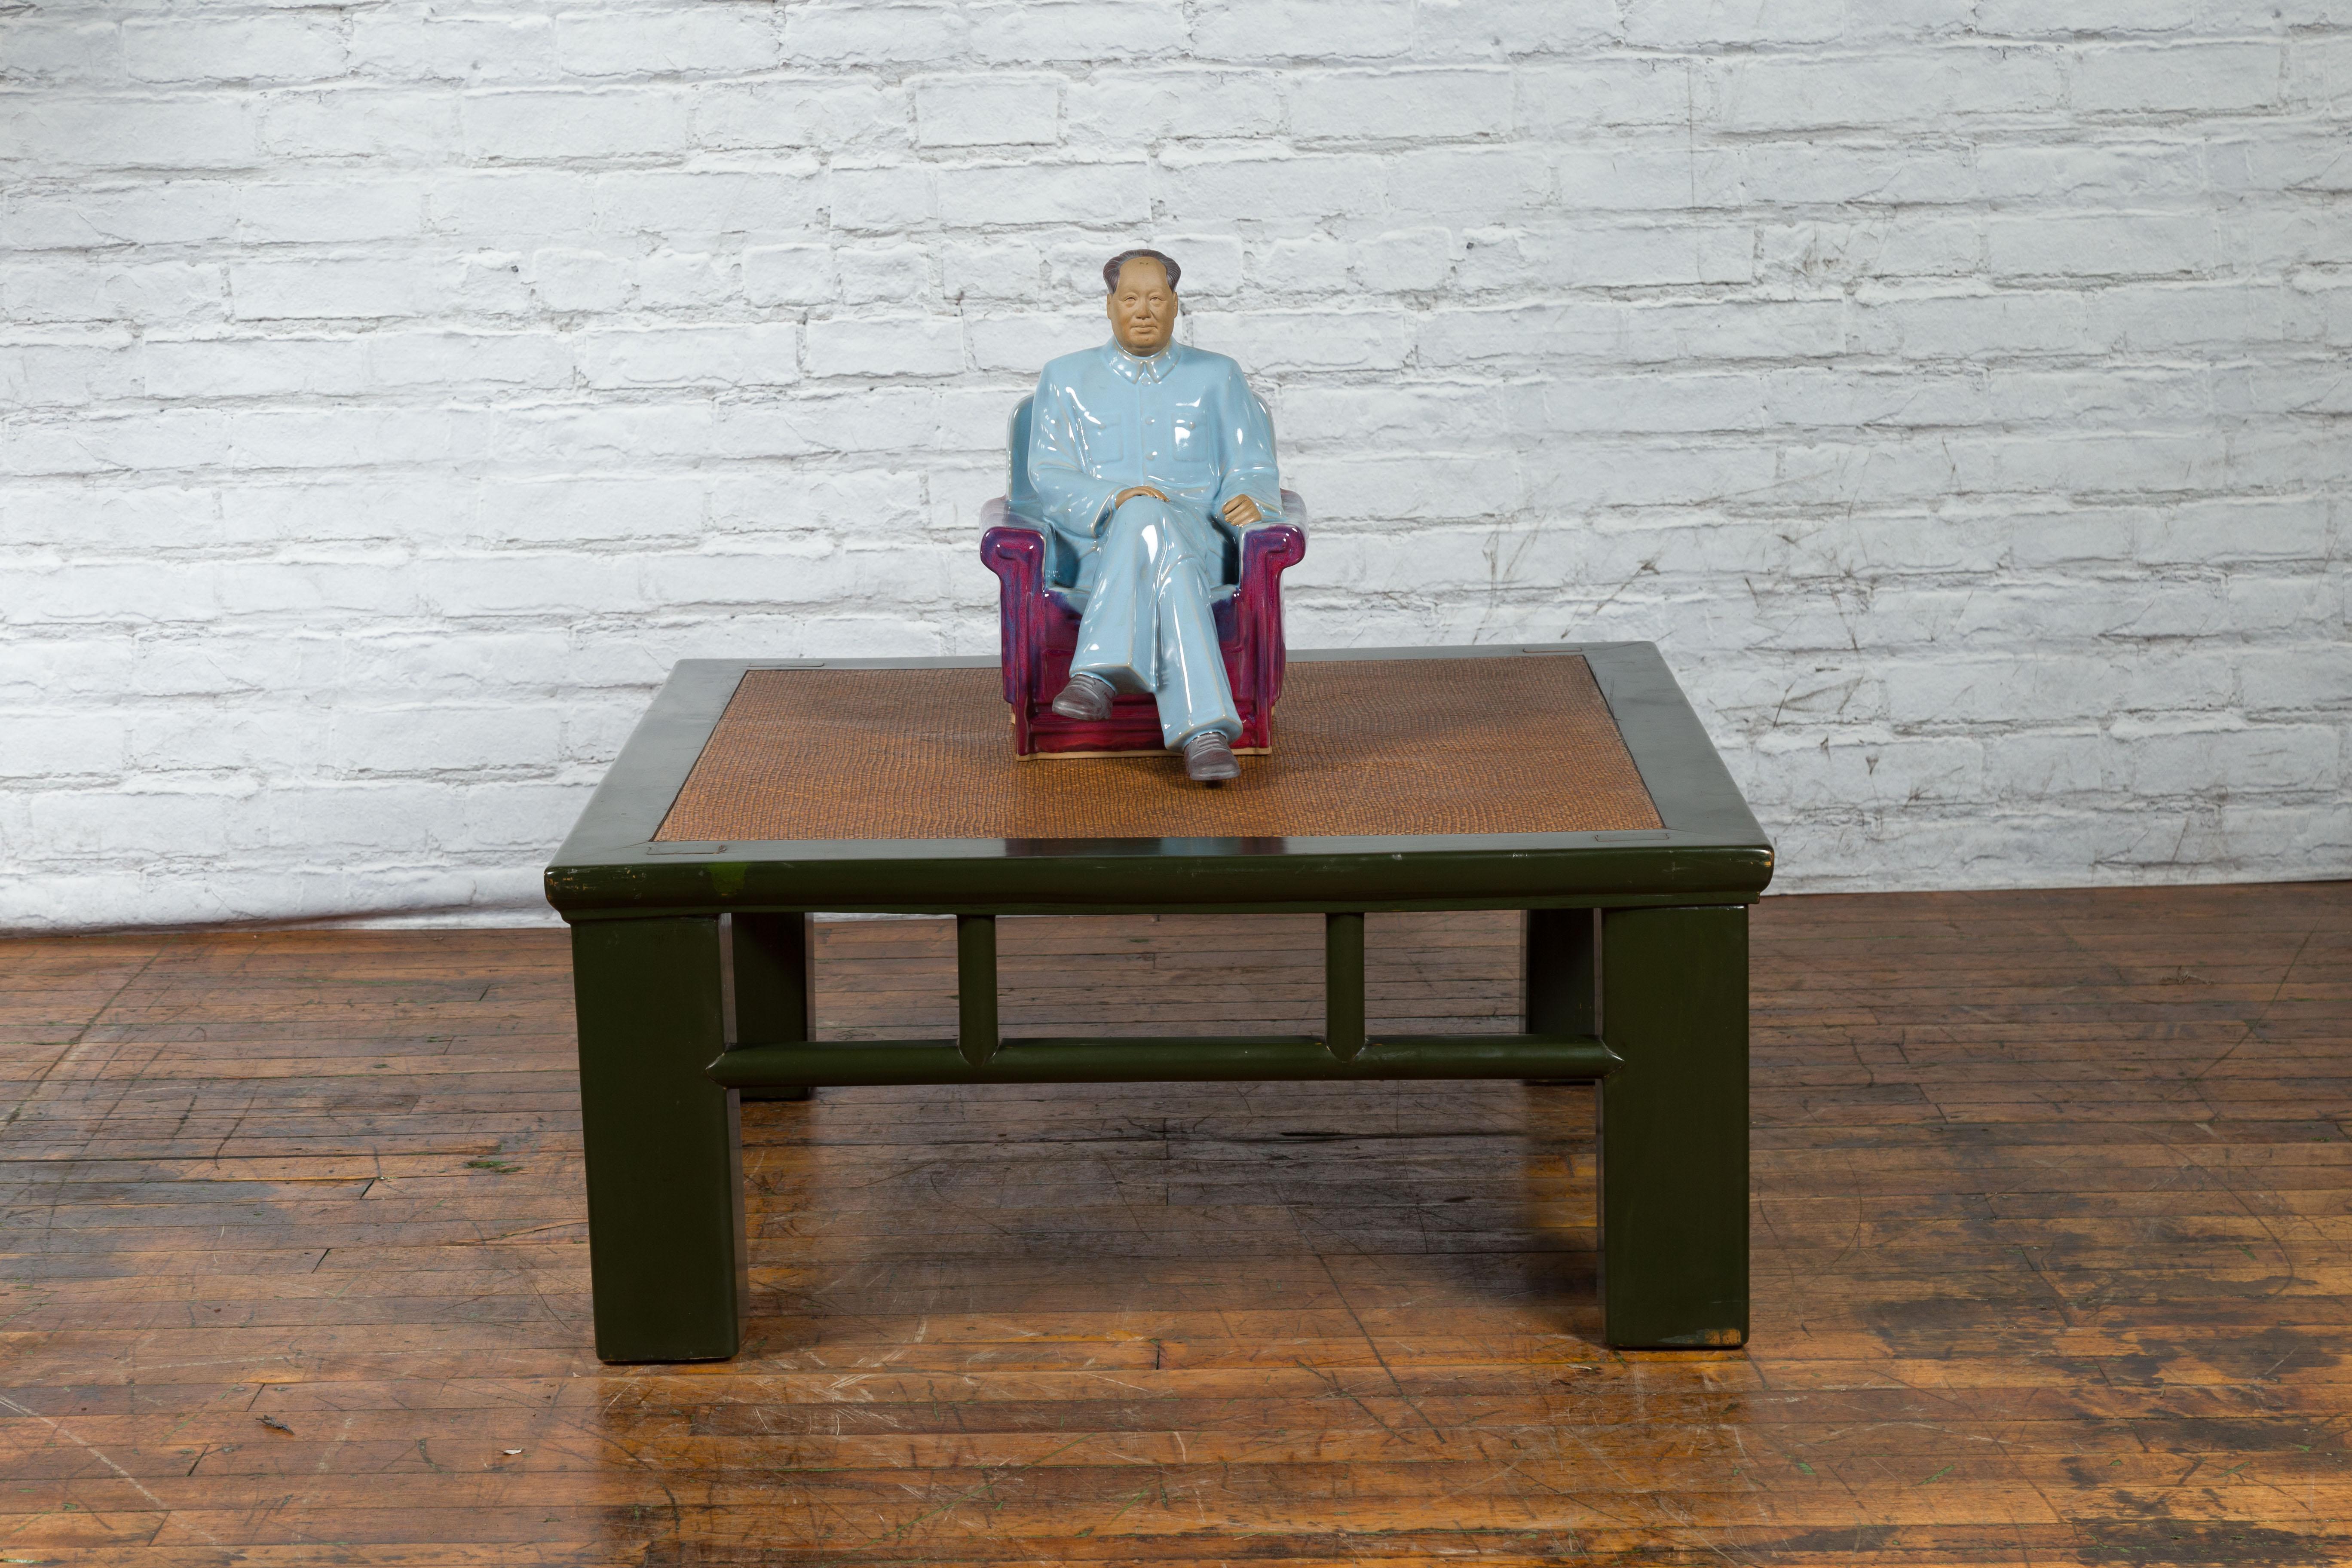 Vintage Glazed Porcelain Statuette of Mao Zedong Seated on an Armchair For Sale 2